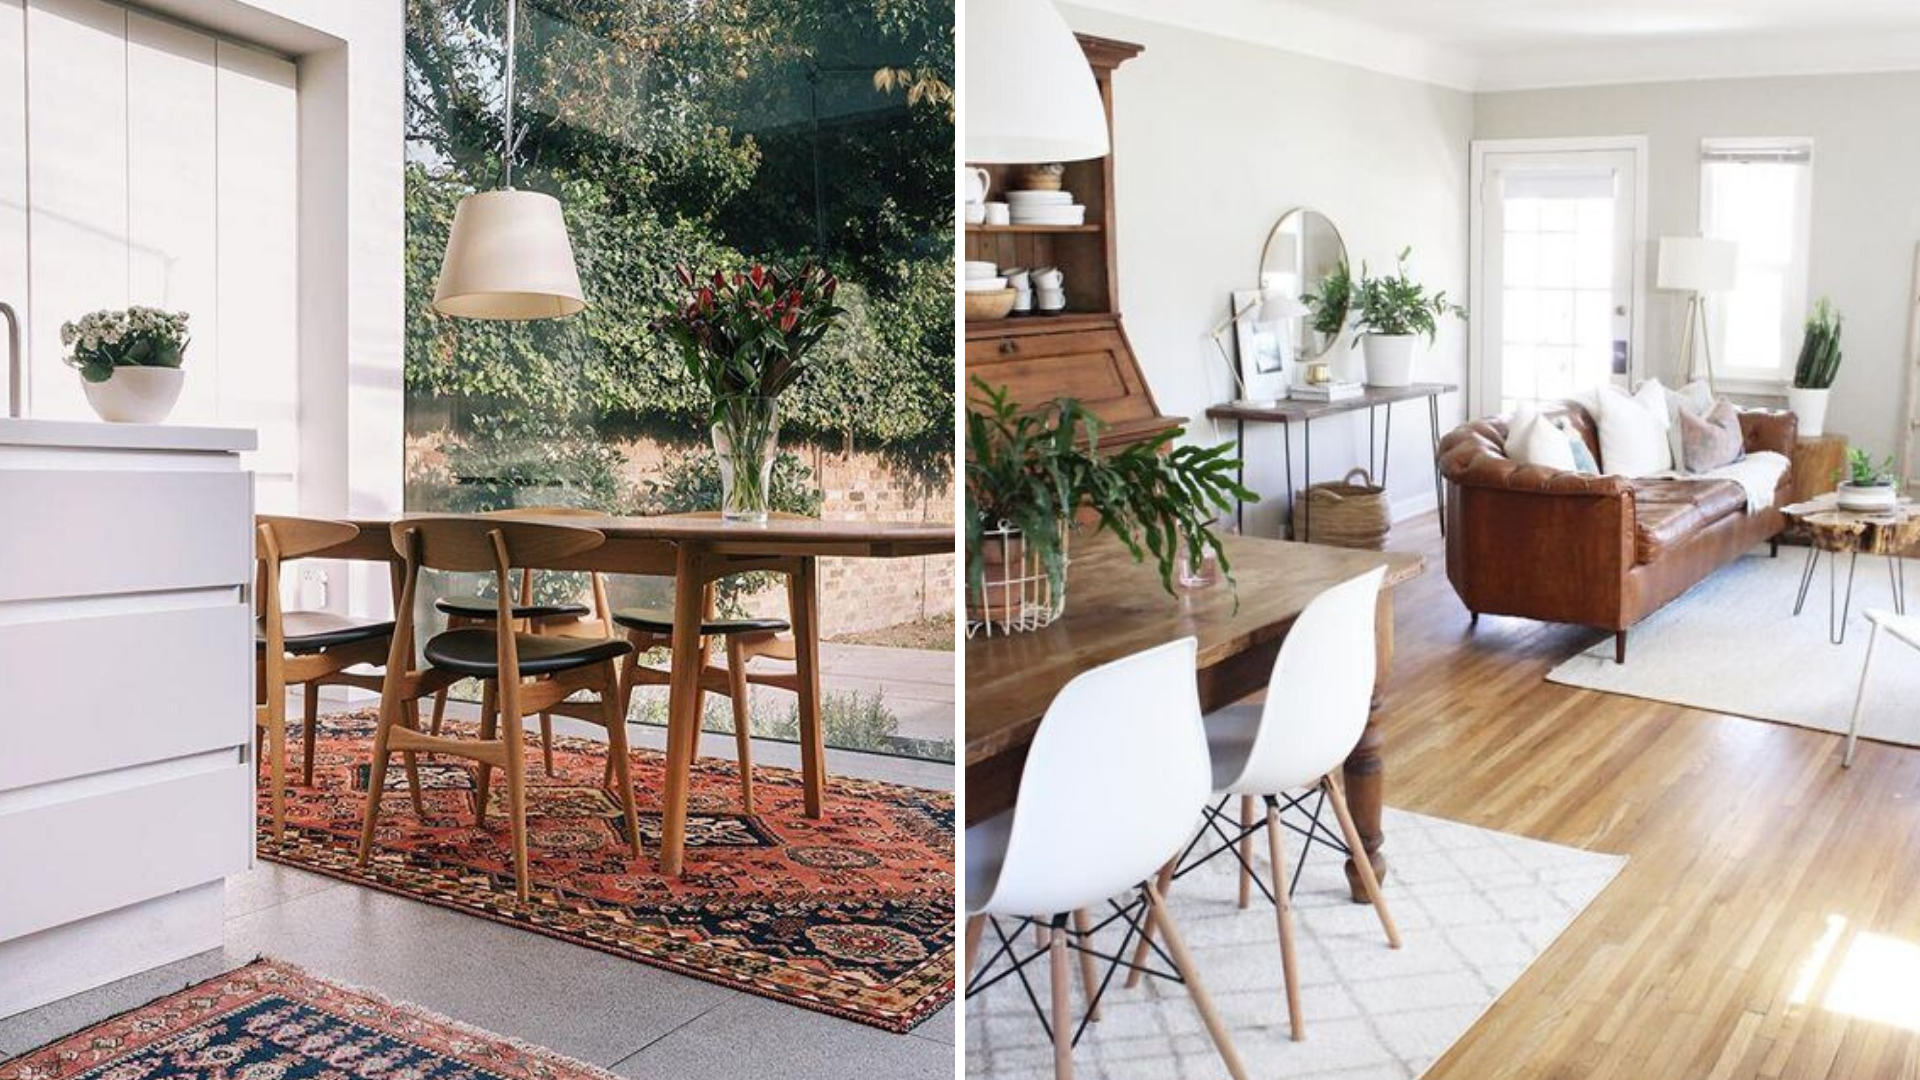 How Decorating With Persian Rugs Make A Small Space Look Bigger